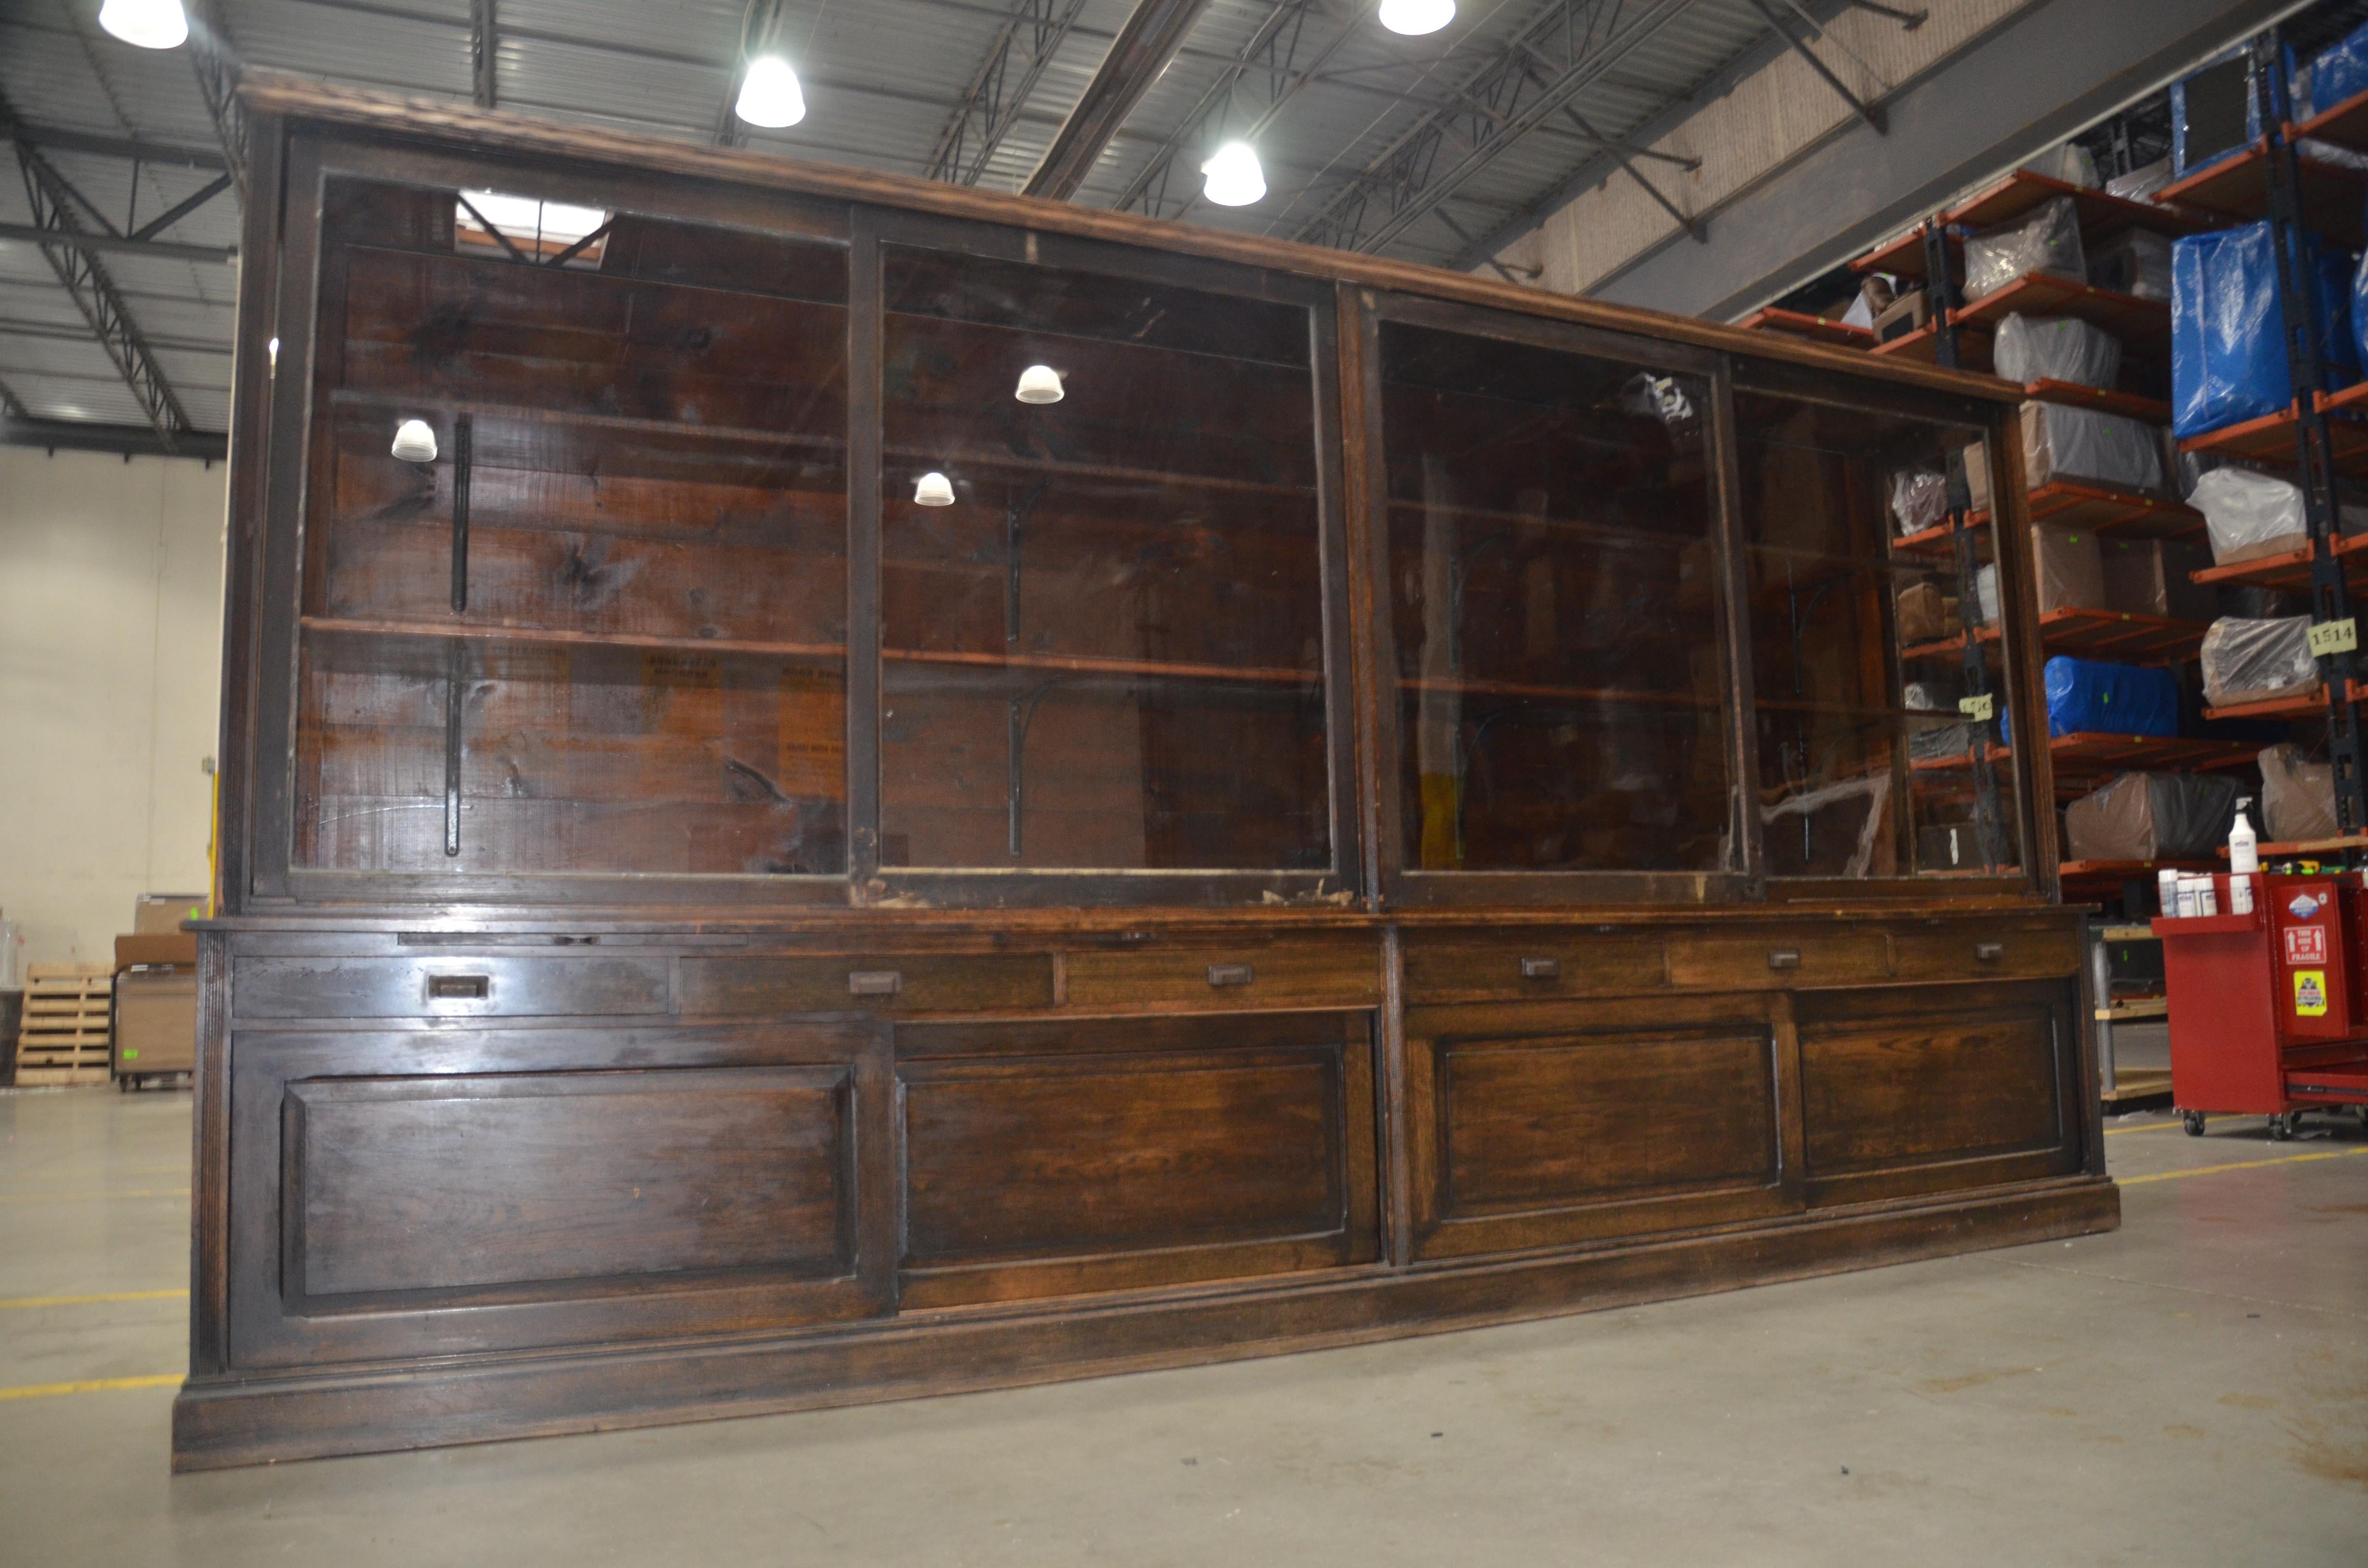 Impressive turn of the century oak wall cabinet that was formerly in a Midwestern general store. This large display cabinet measures 14 ft long. It features sliding glass doors on the top as well as sliding oak doors on the bottom. The center has